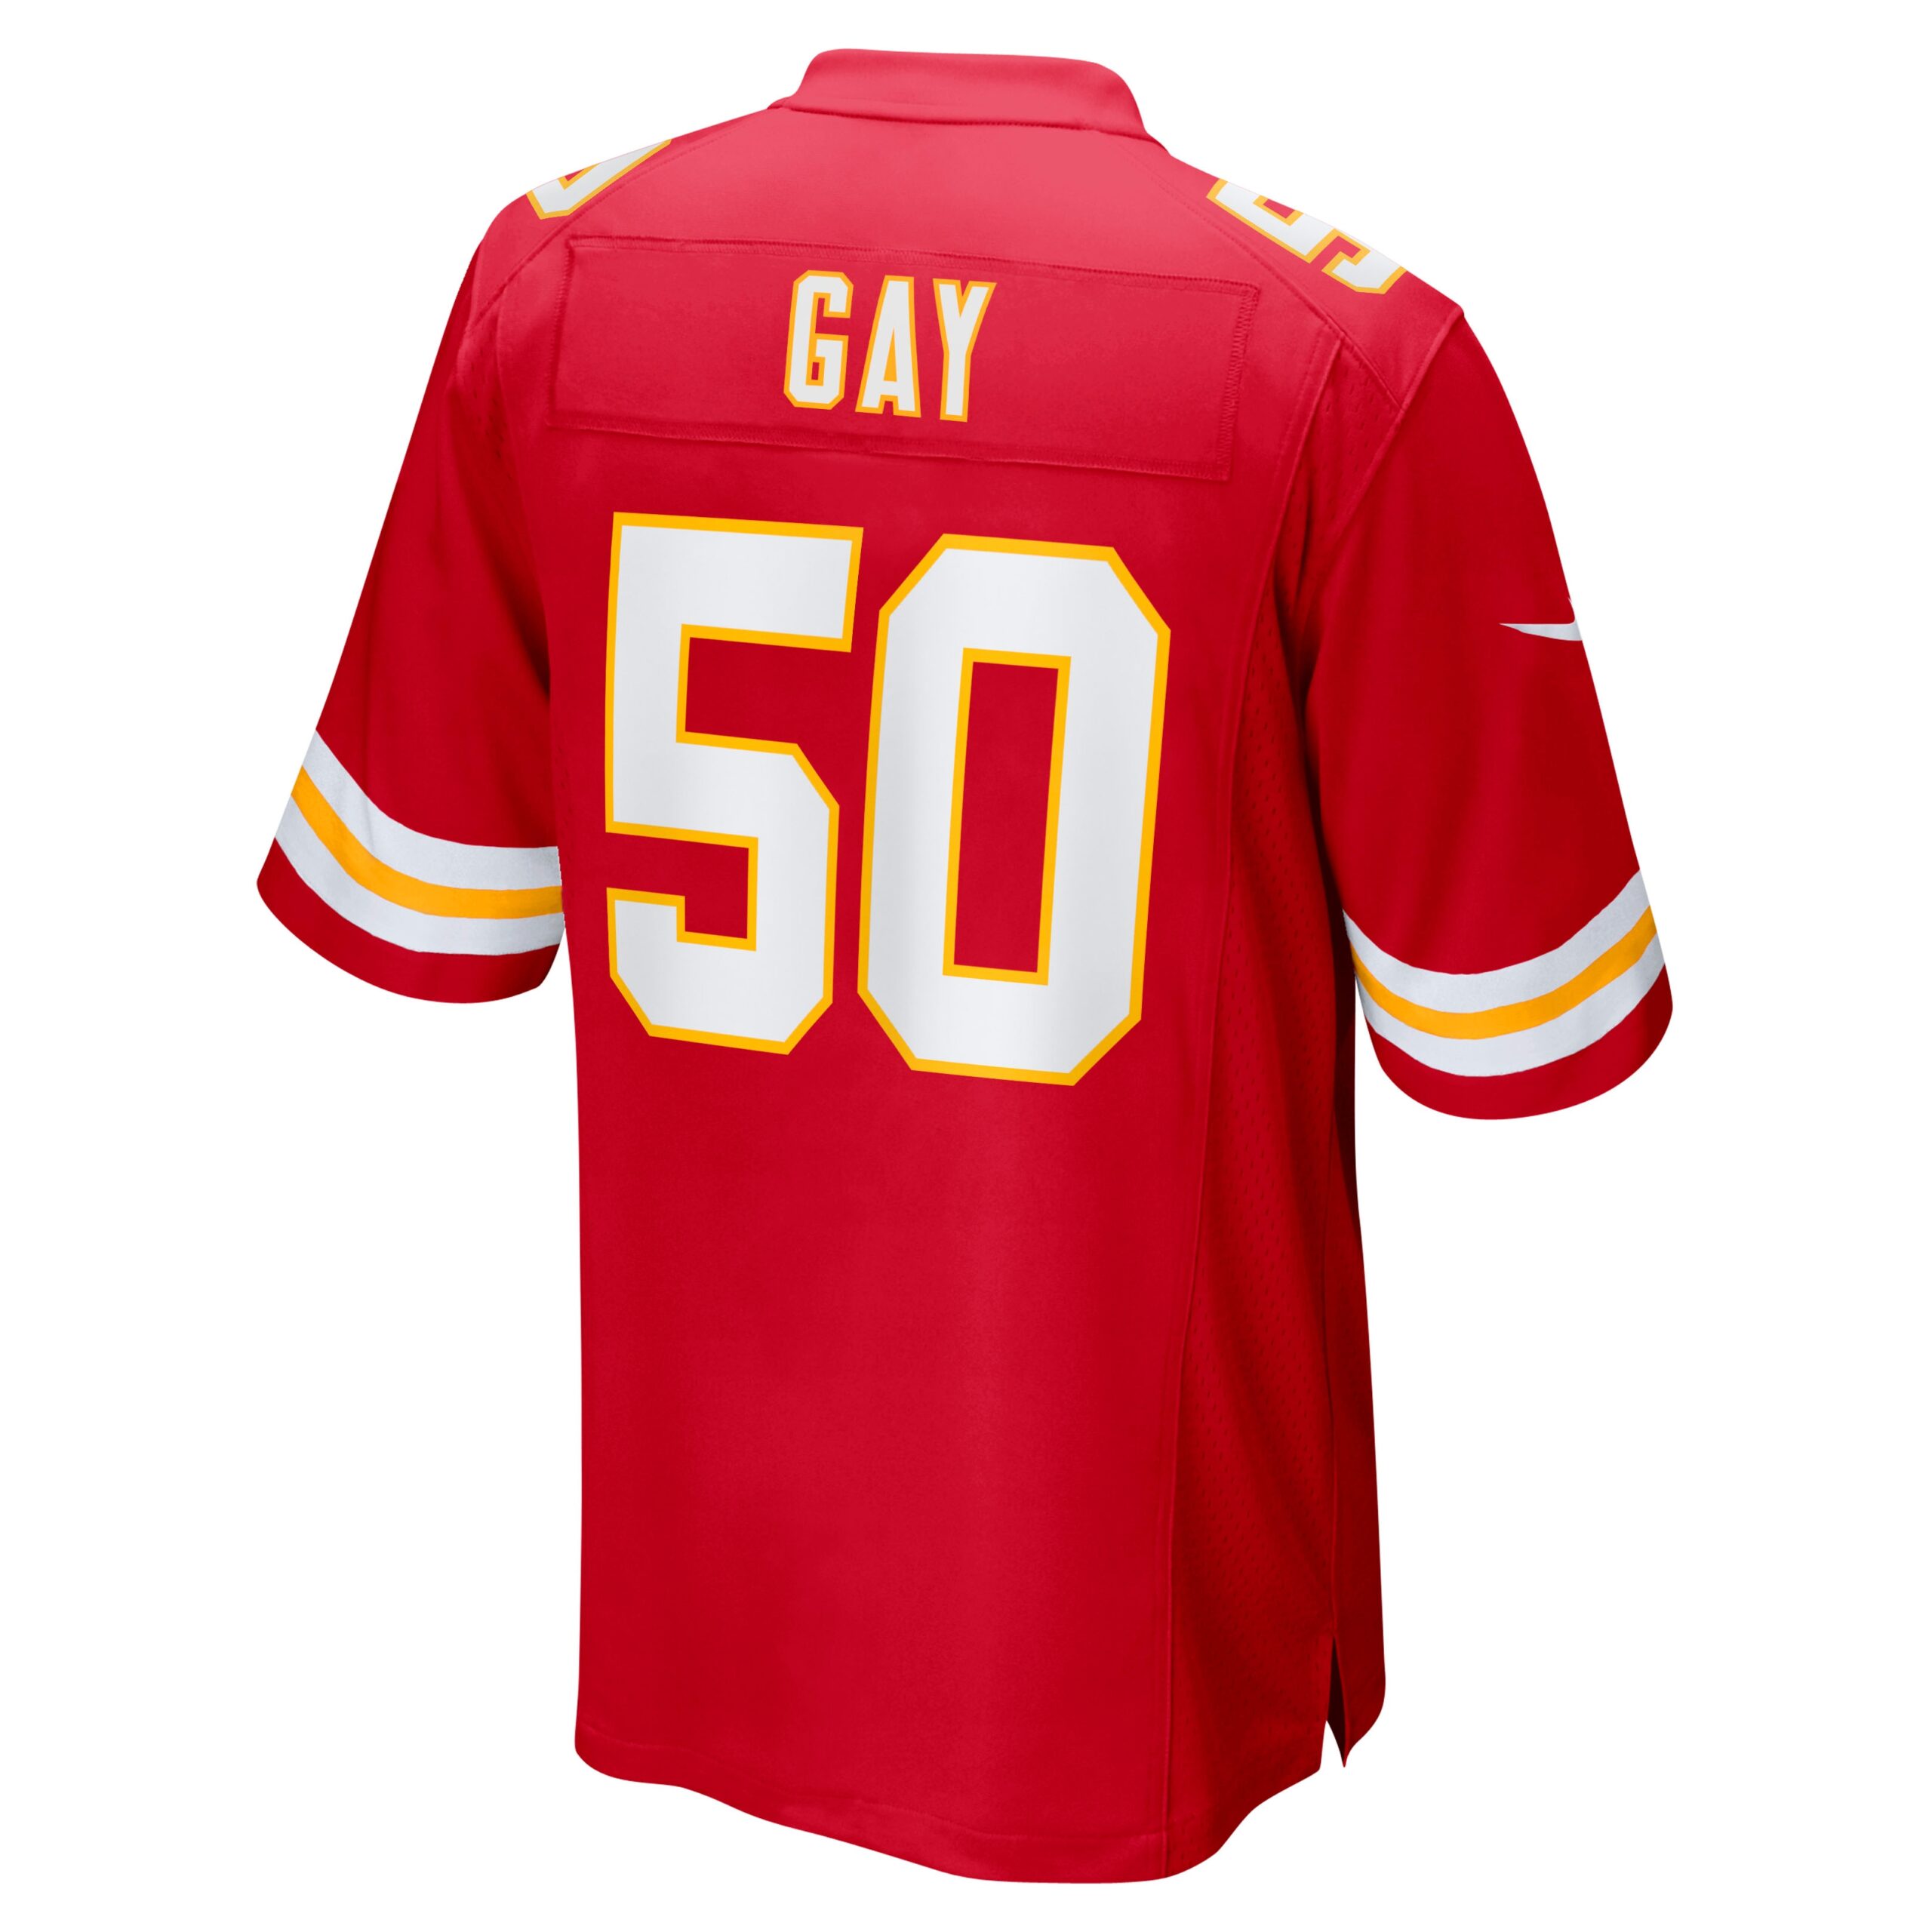 Men's Kansas City Chiefs Jerseys Red Willie Gay Game Style